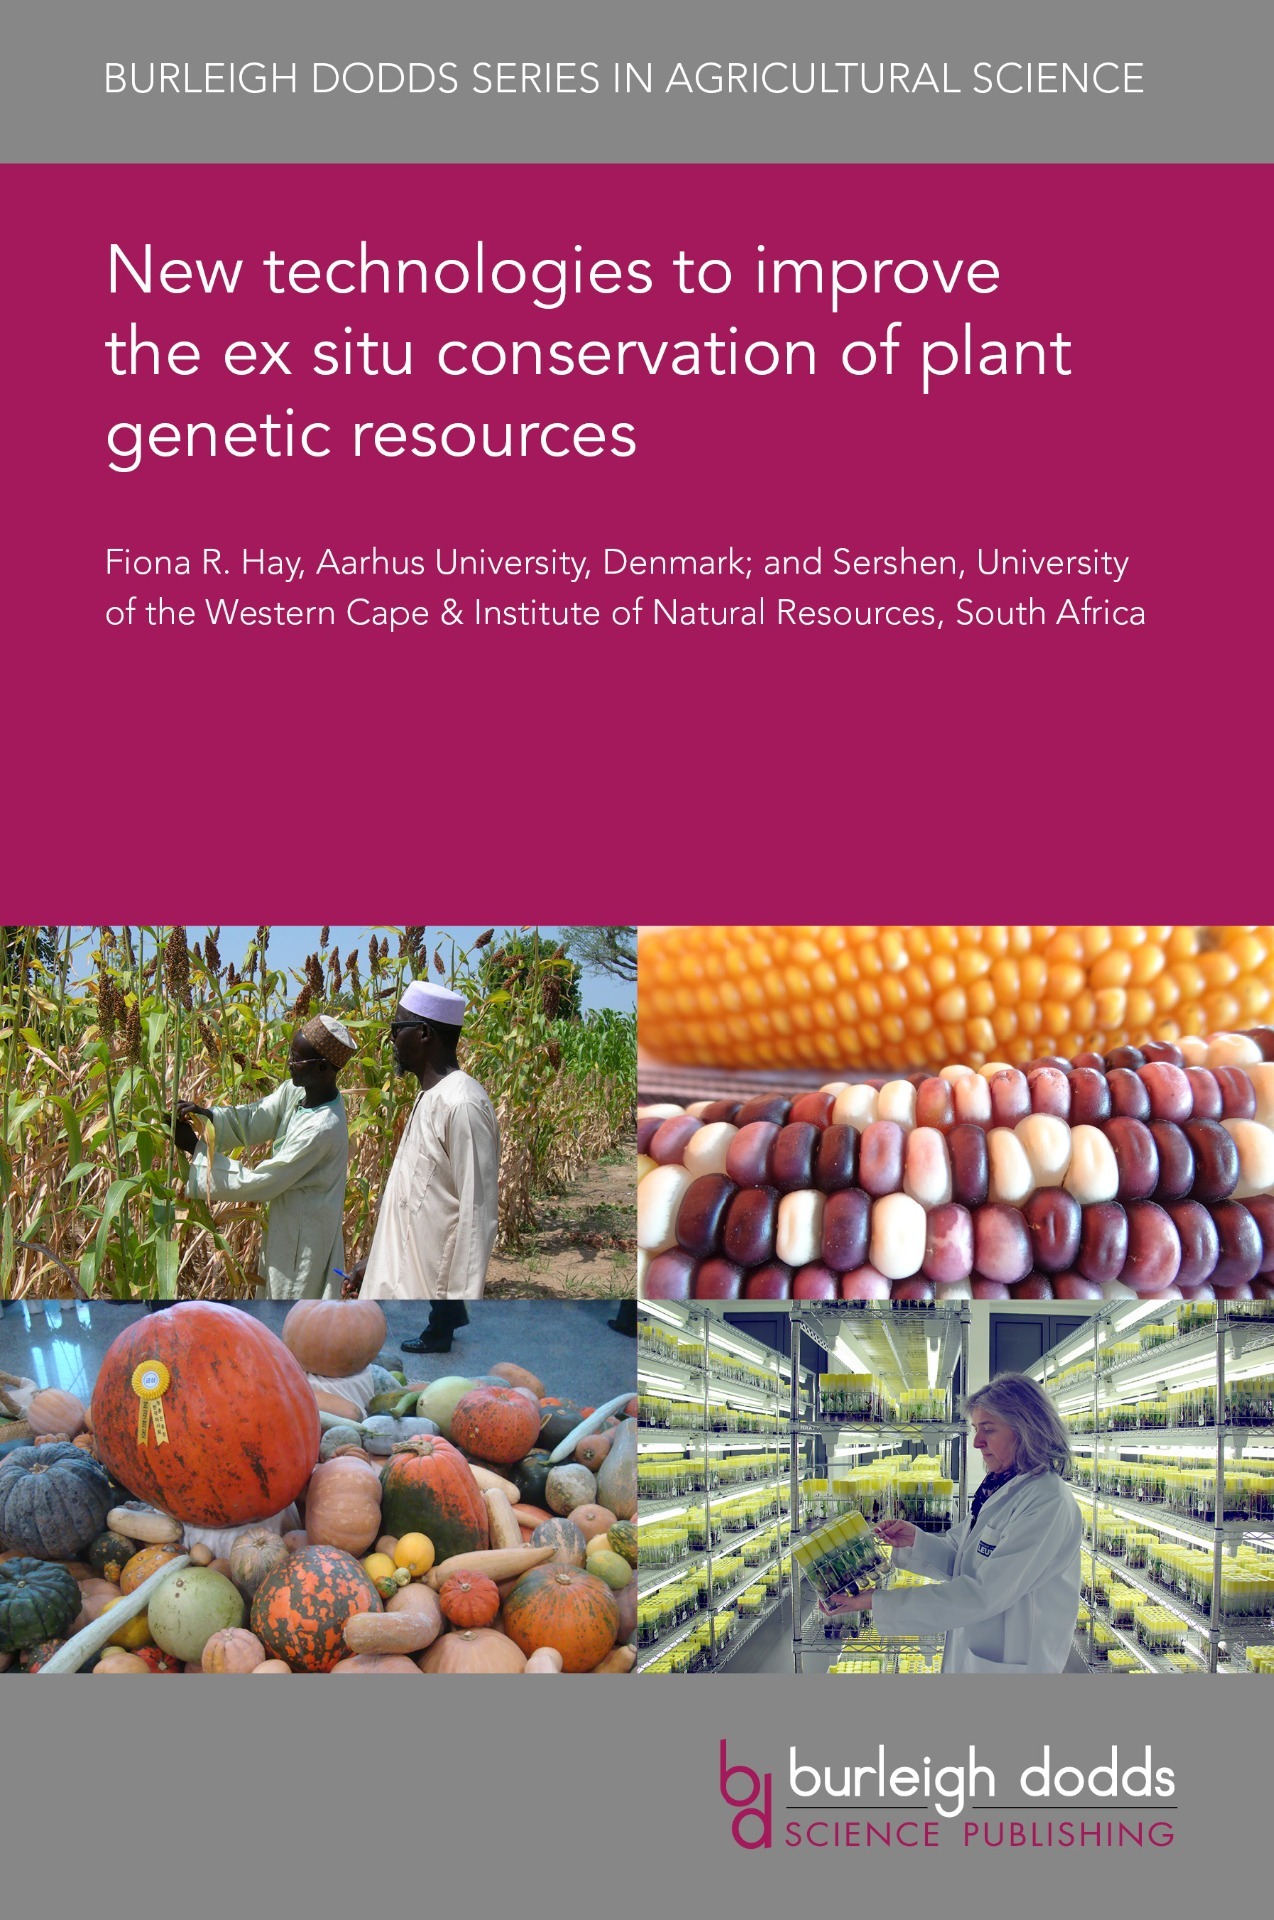 New technologies to improve the ex situ conservation of plant genetic resources